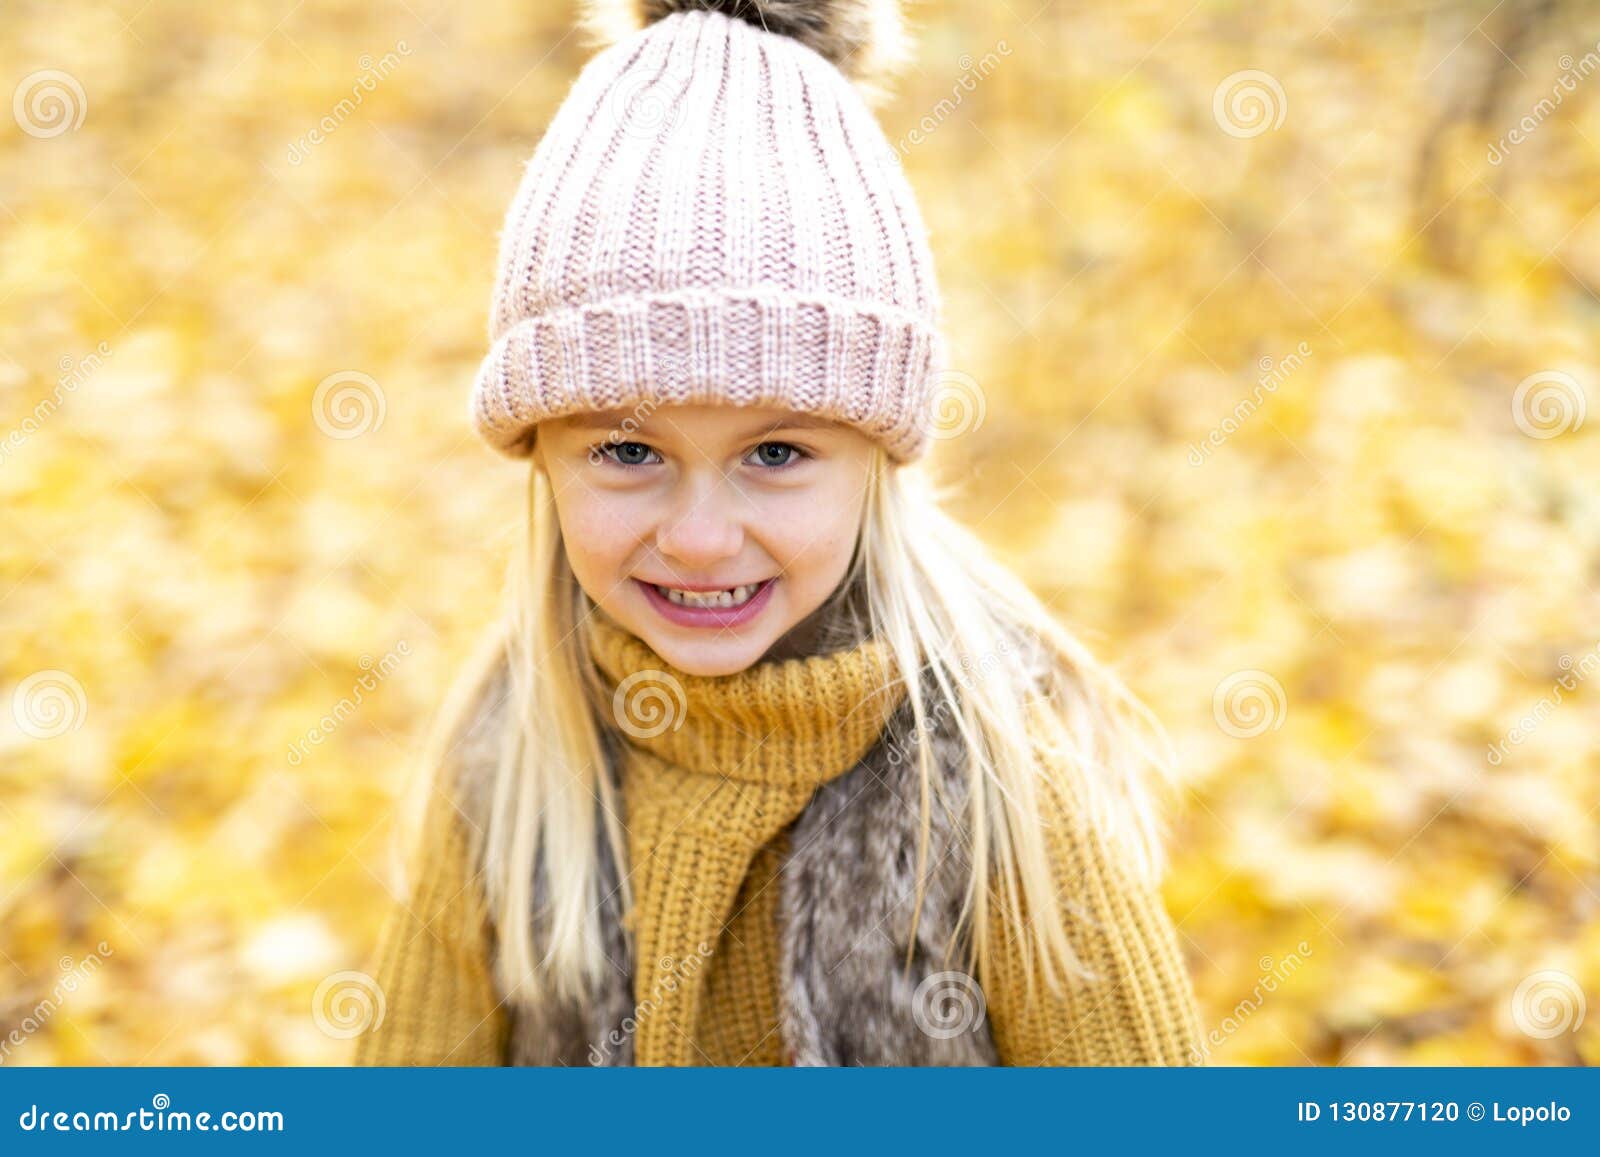 An Autumn Portrait of Cute Blond Child Girl Stock Photo - Image of ...